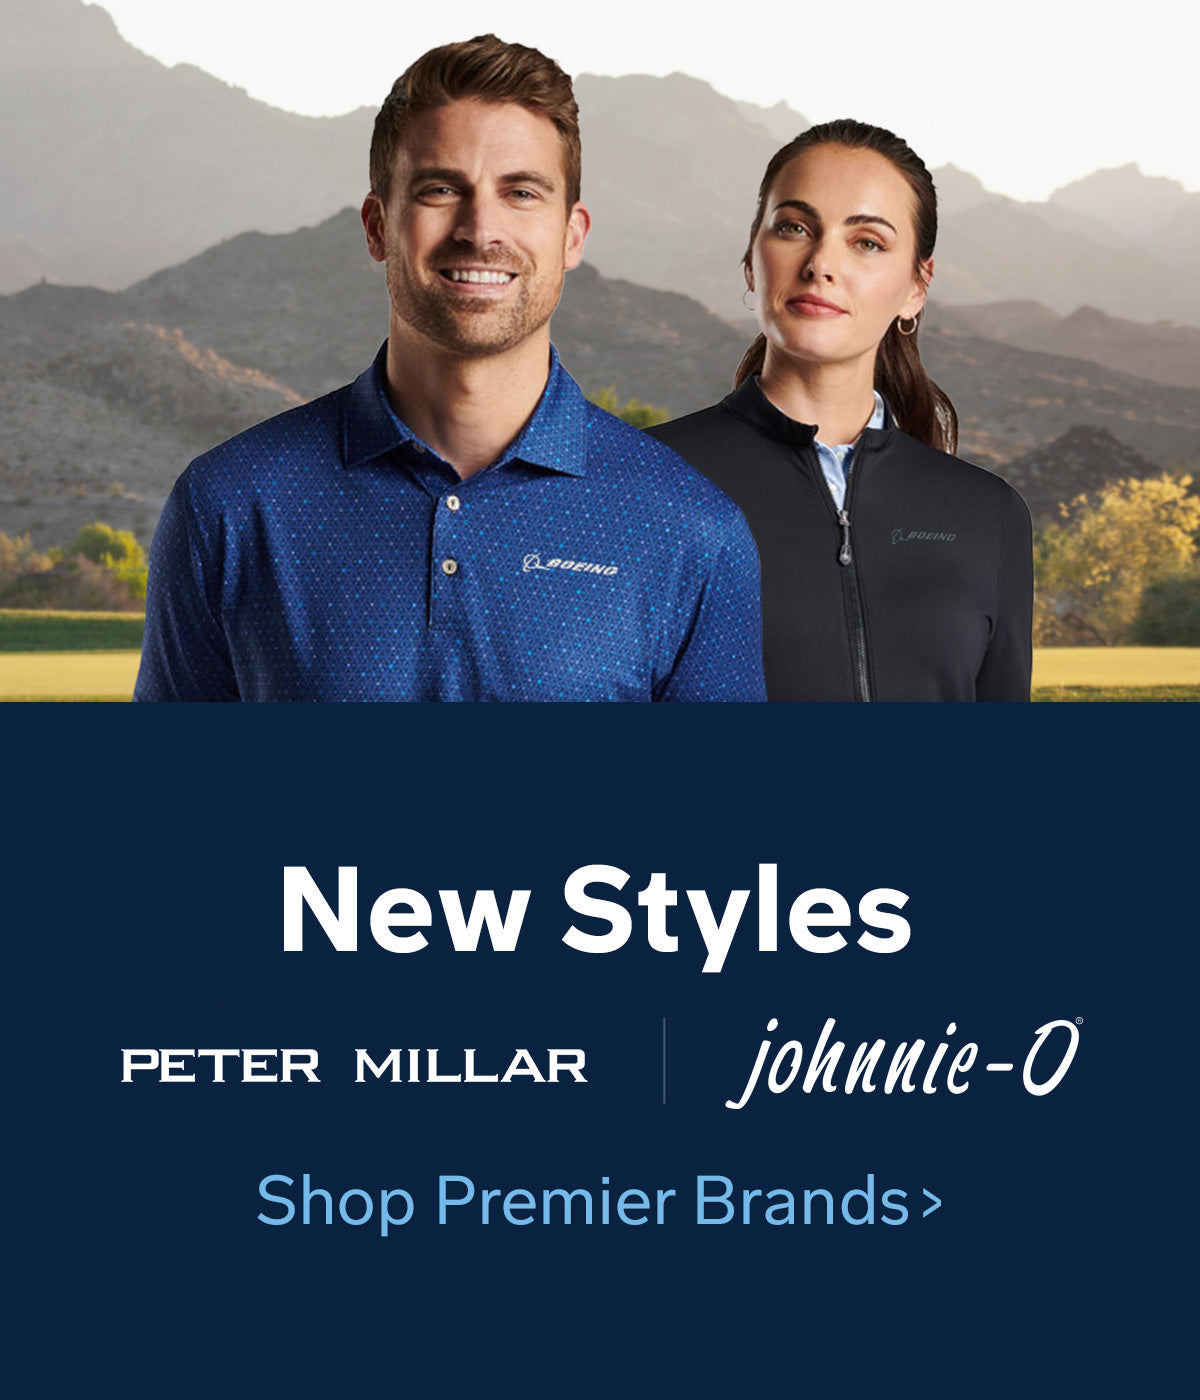 Peter Millar and Johnnie-O new styles for Boeing mobile banner featuring a man wearing blue polo shirt and women in black full-zip.